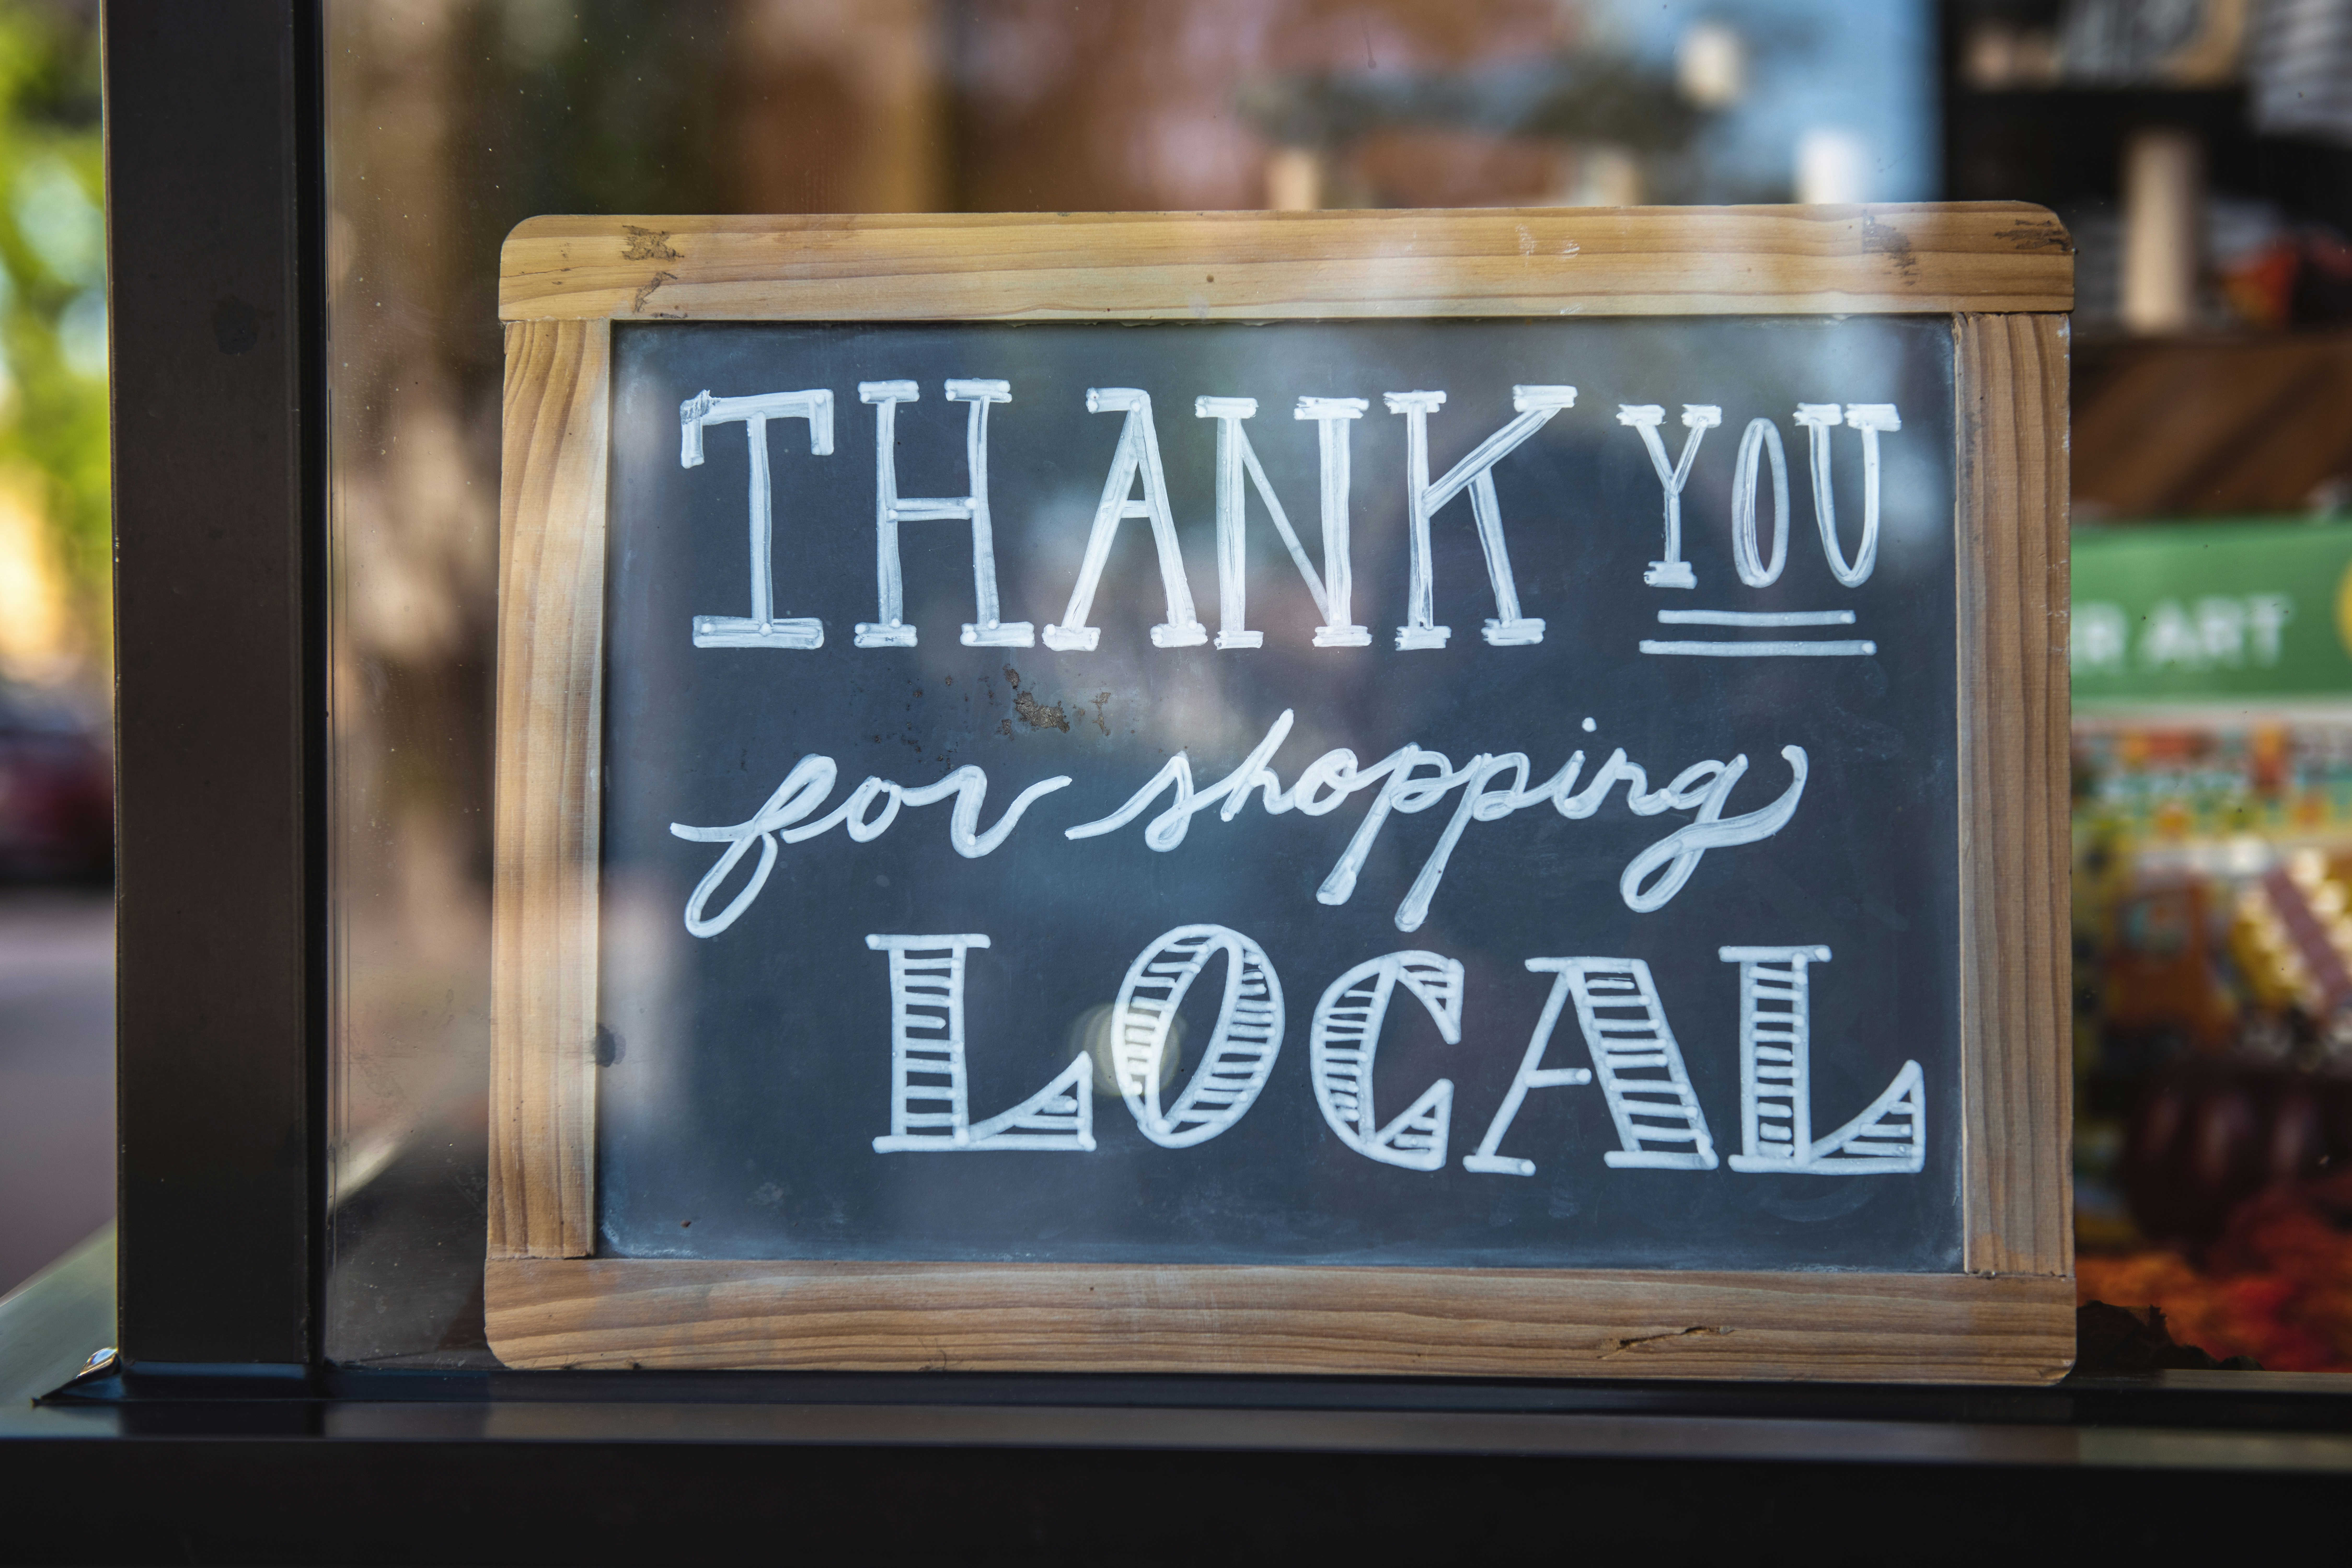 Thank you for shopping local sign in shop window